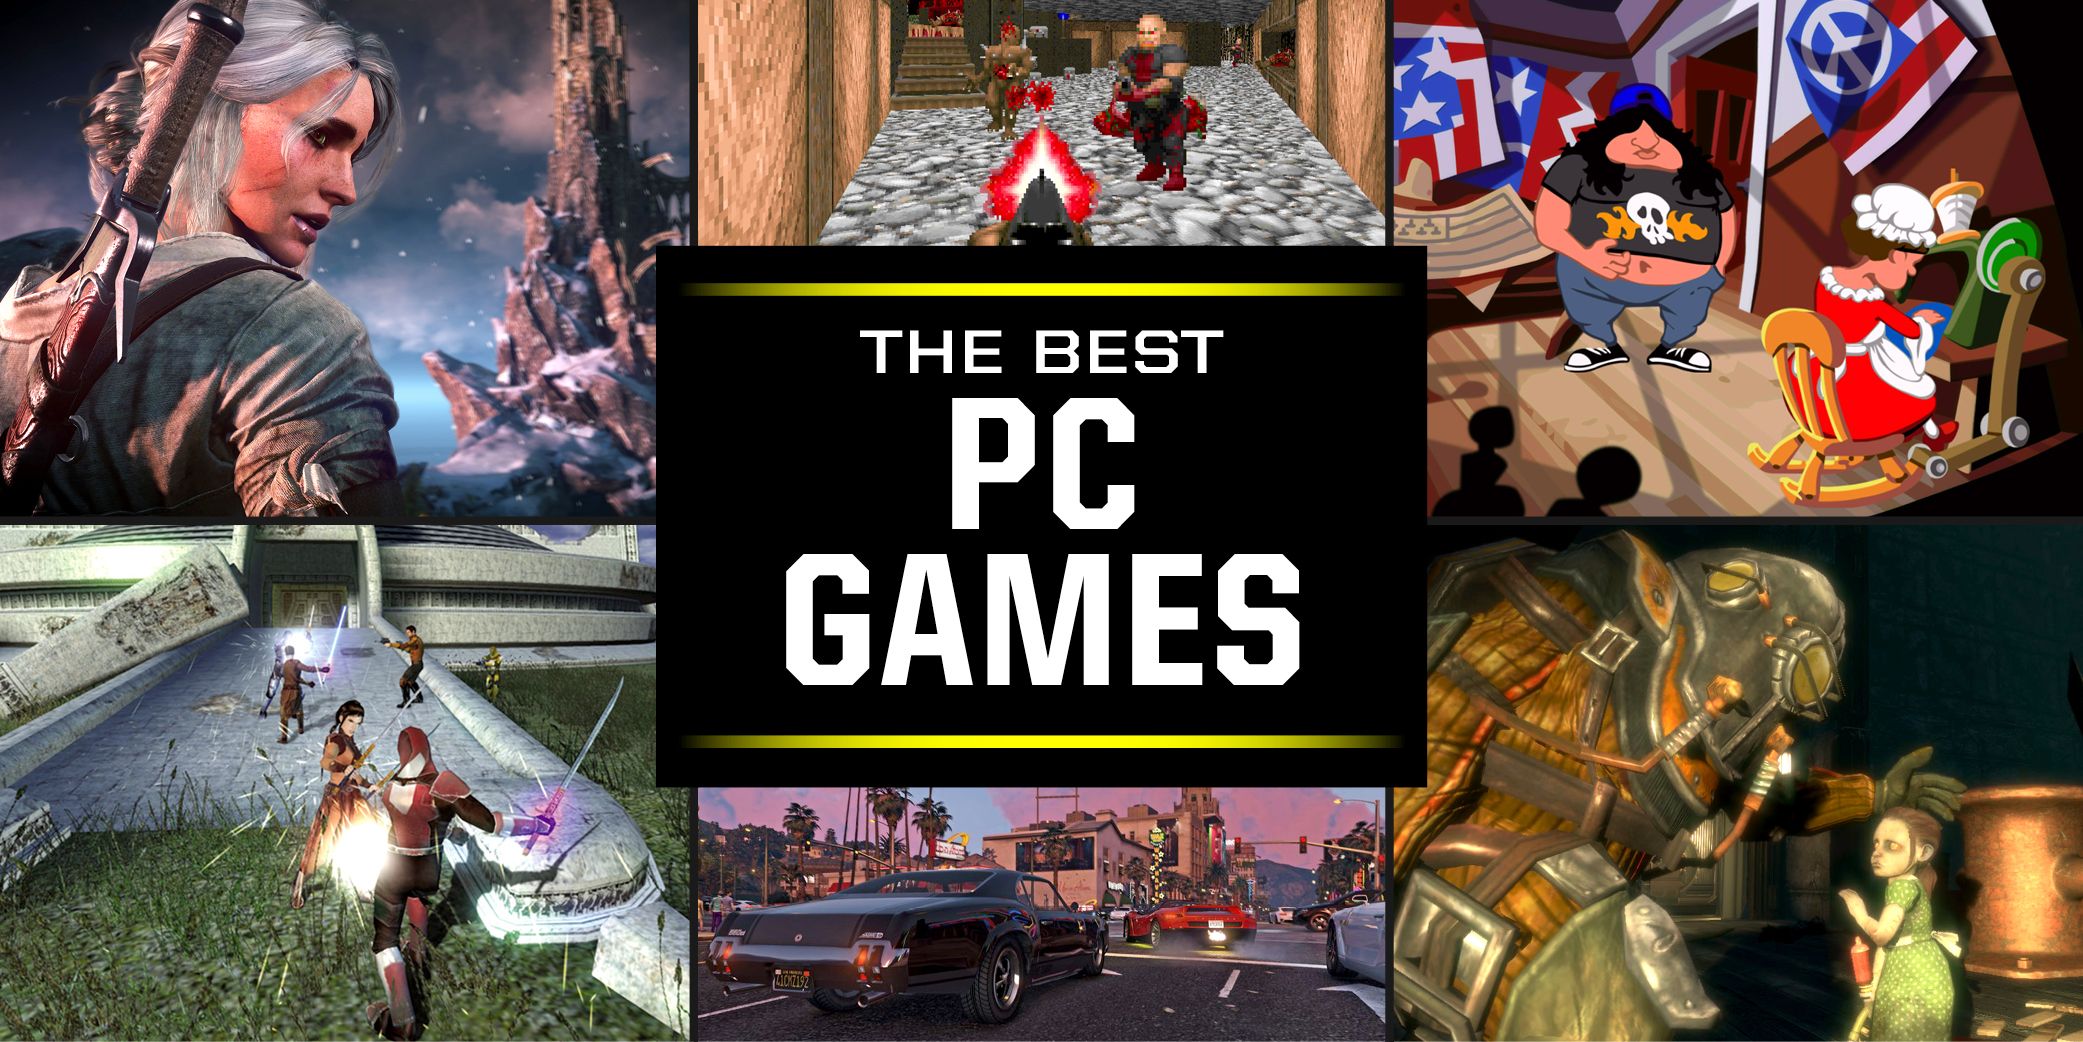 The 50 Best PC Games of All Time: The Top 10